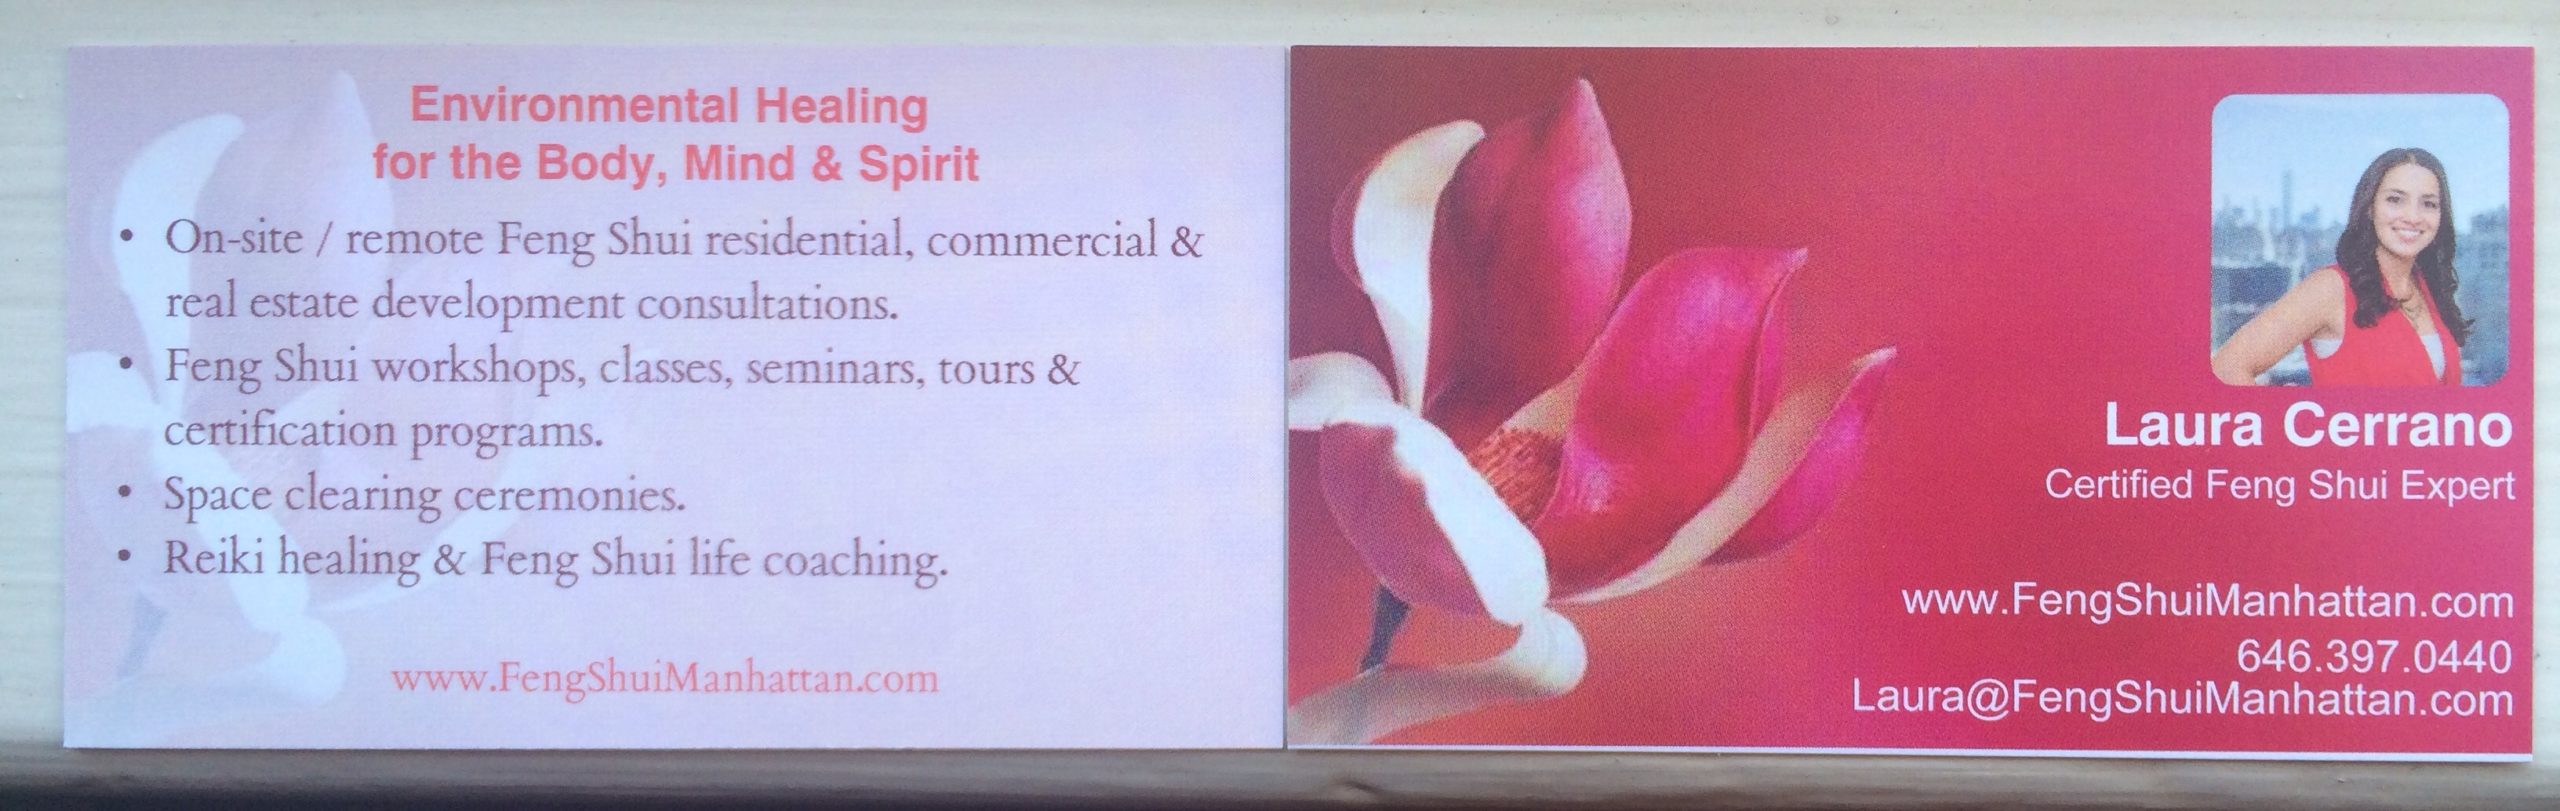 feng shui business cards 2